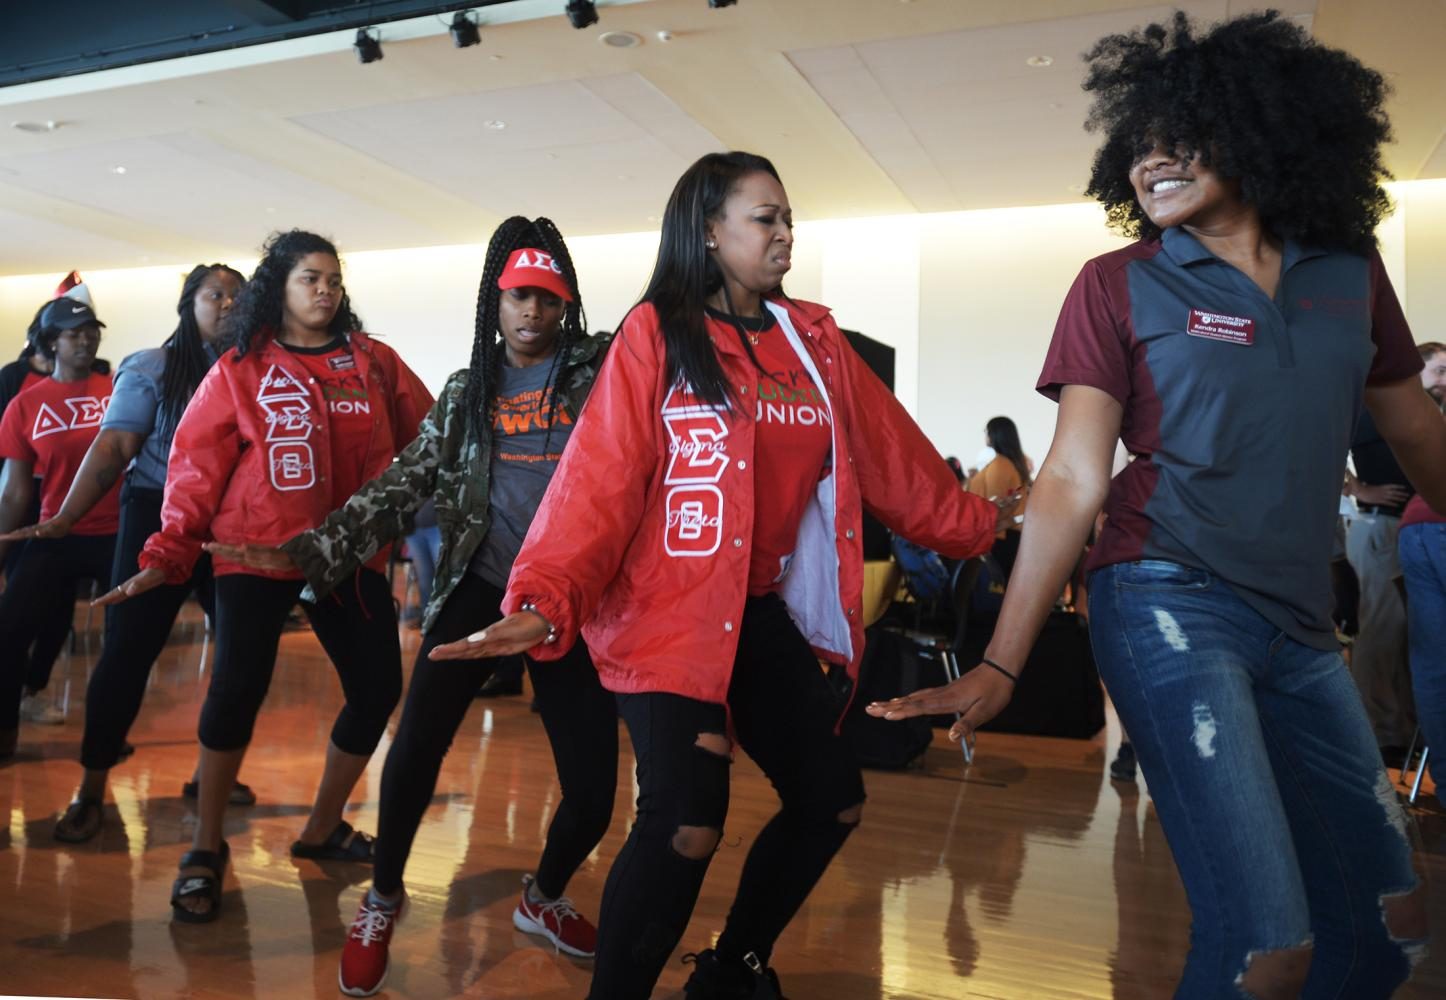 Delta Sigma Theta sorority members, fourth from the left, Renaye Tolbert, Alexis Jackson and Kendra Robinson dance 
at Conexion, hosted by Multicultural Student Services, on Sunday in the CUB Senior Ballroom.  